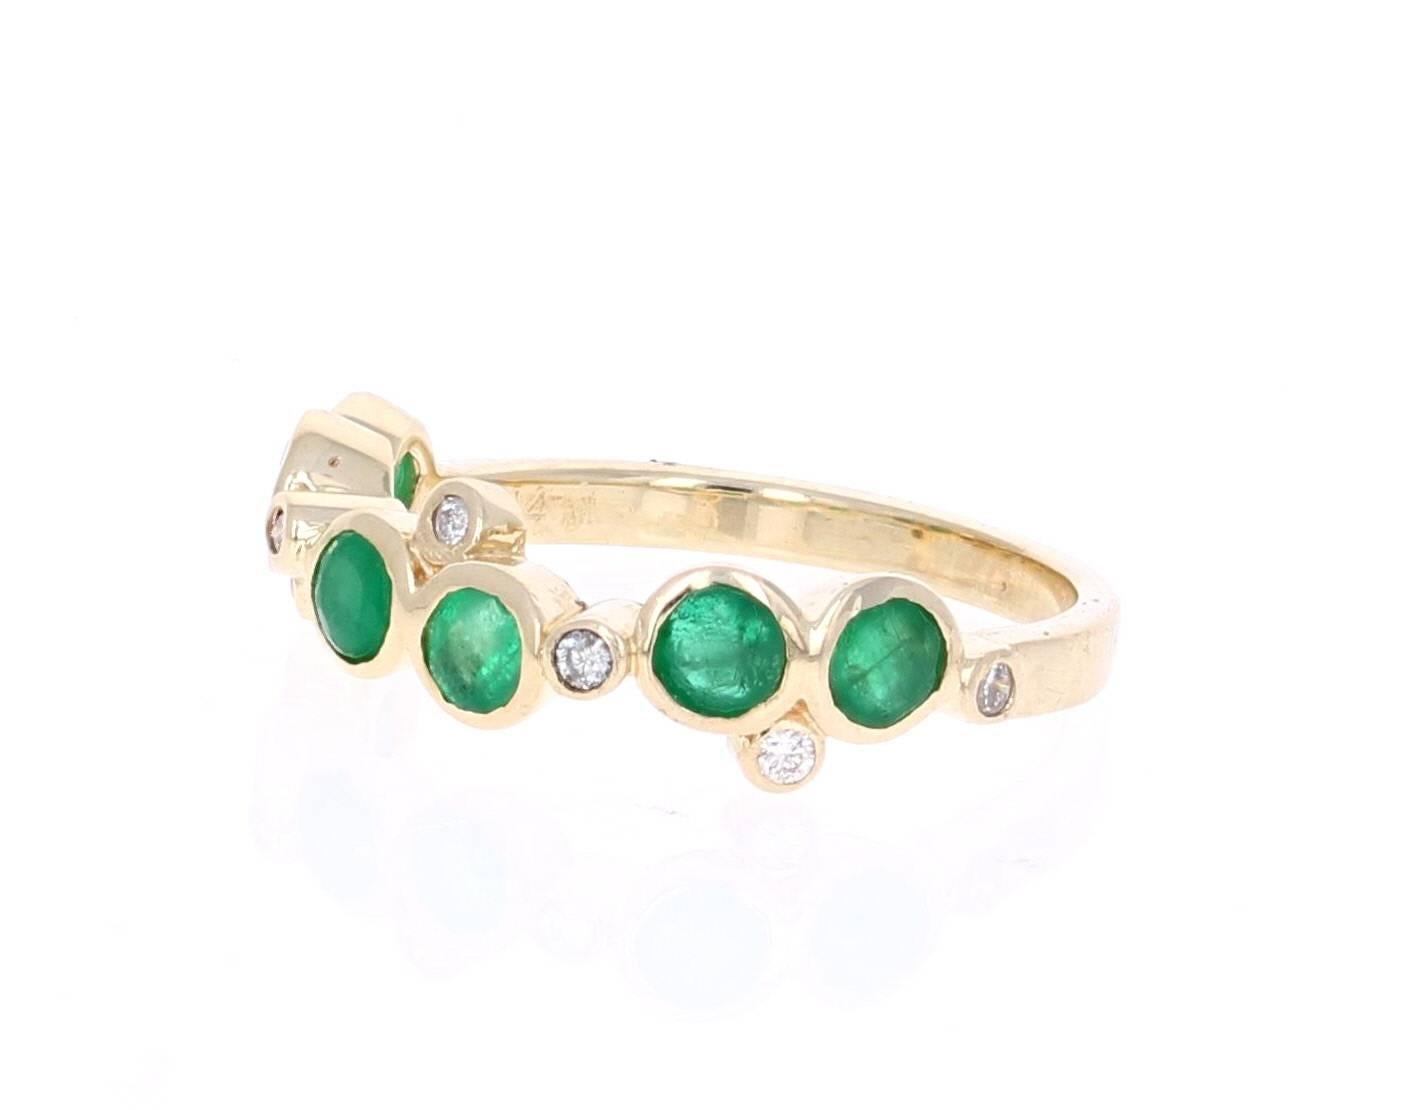 Cute and dainty Emerald and Diamond band that is sure to be a great addition to anyone's accessory collection.   There are 6 Round Cut Emeralds that weigh 0.93 carats and 7 Round Cut Diamonds that weigh 0.10 carats.  The total carat weight of the